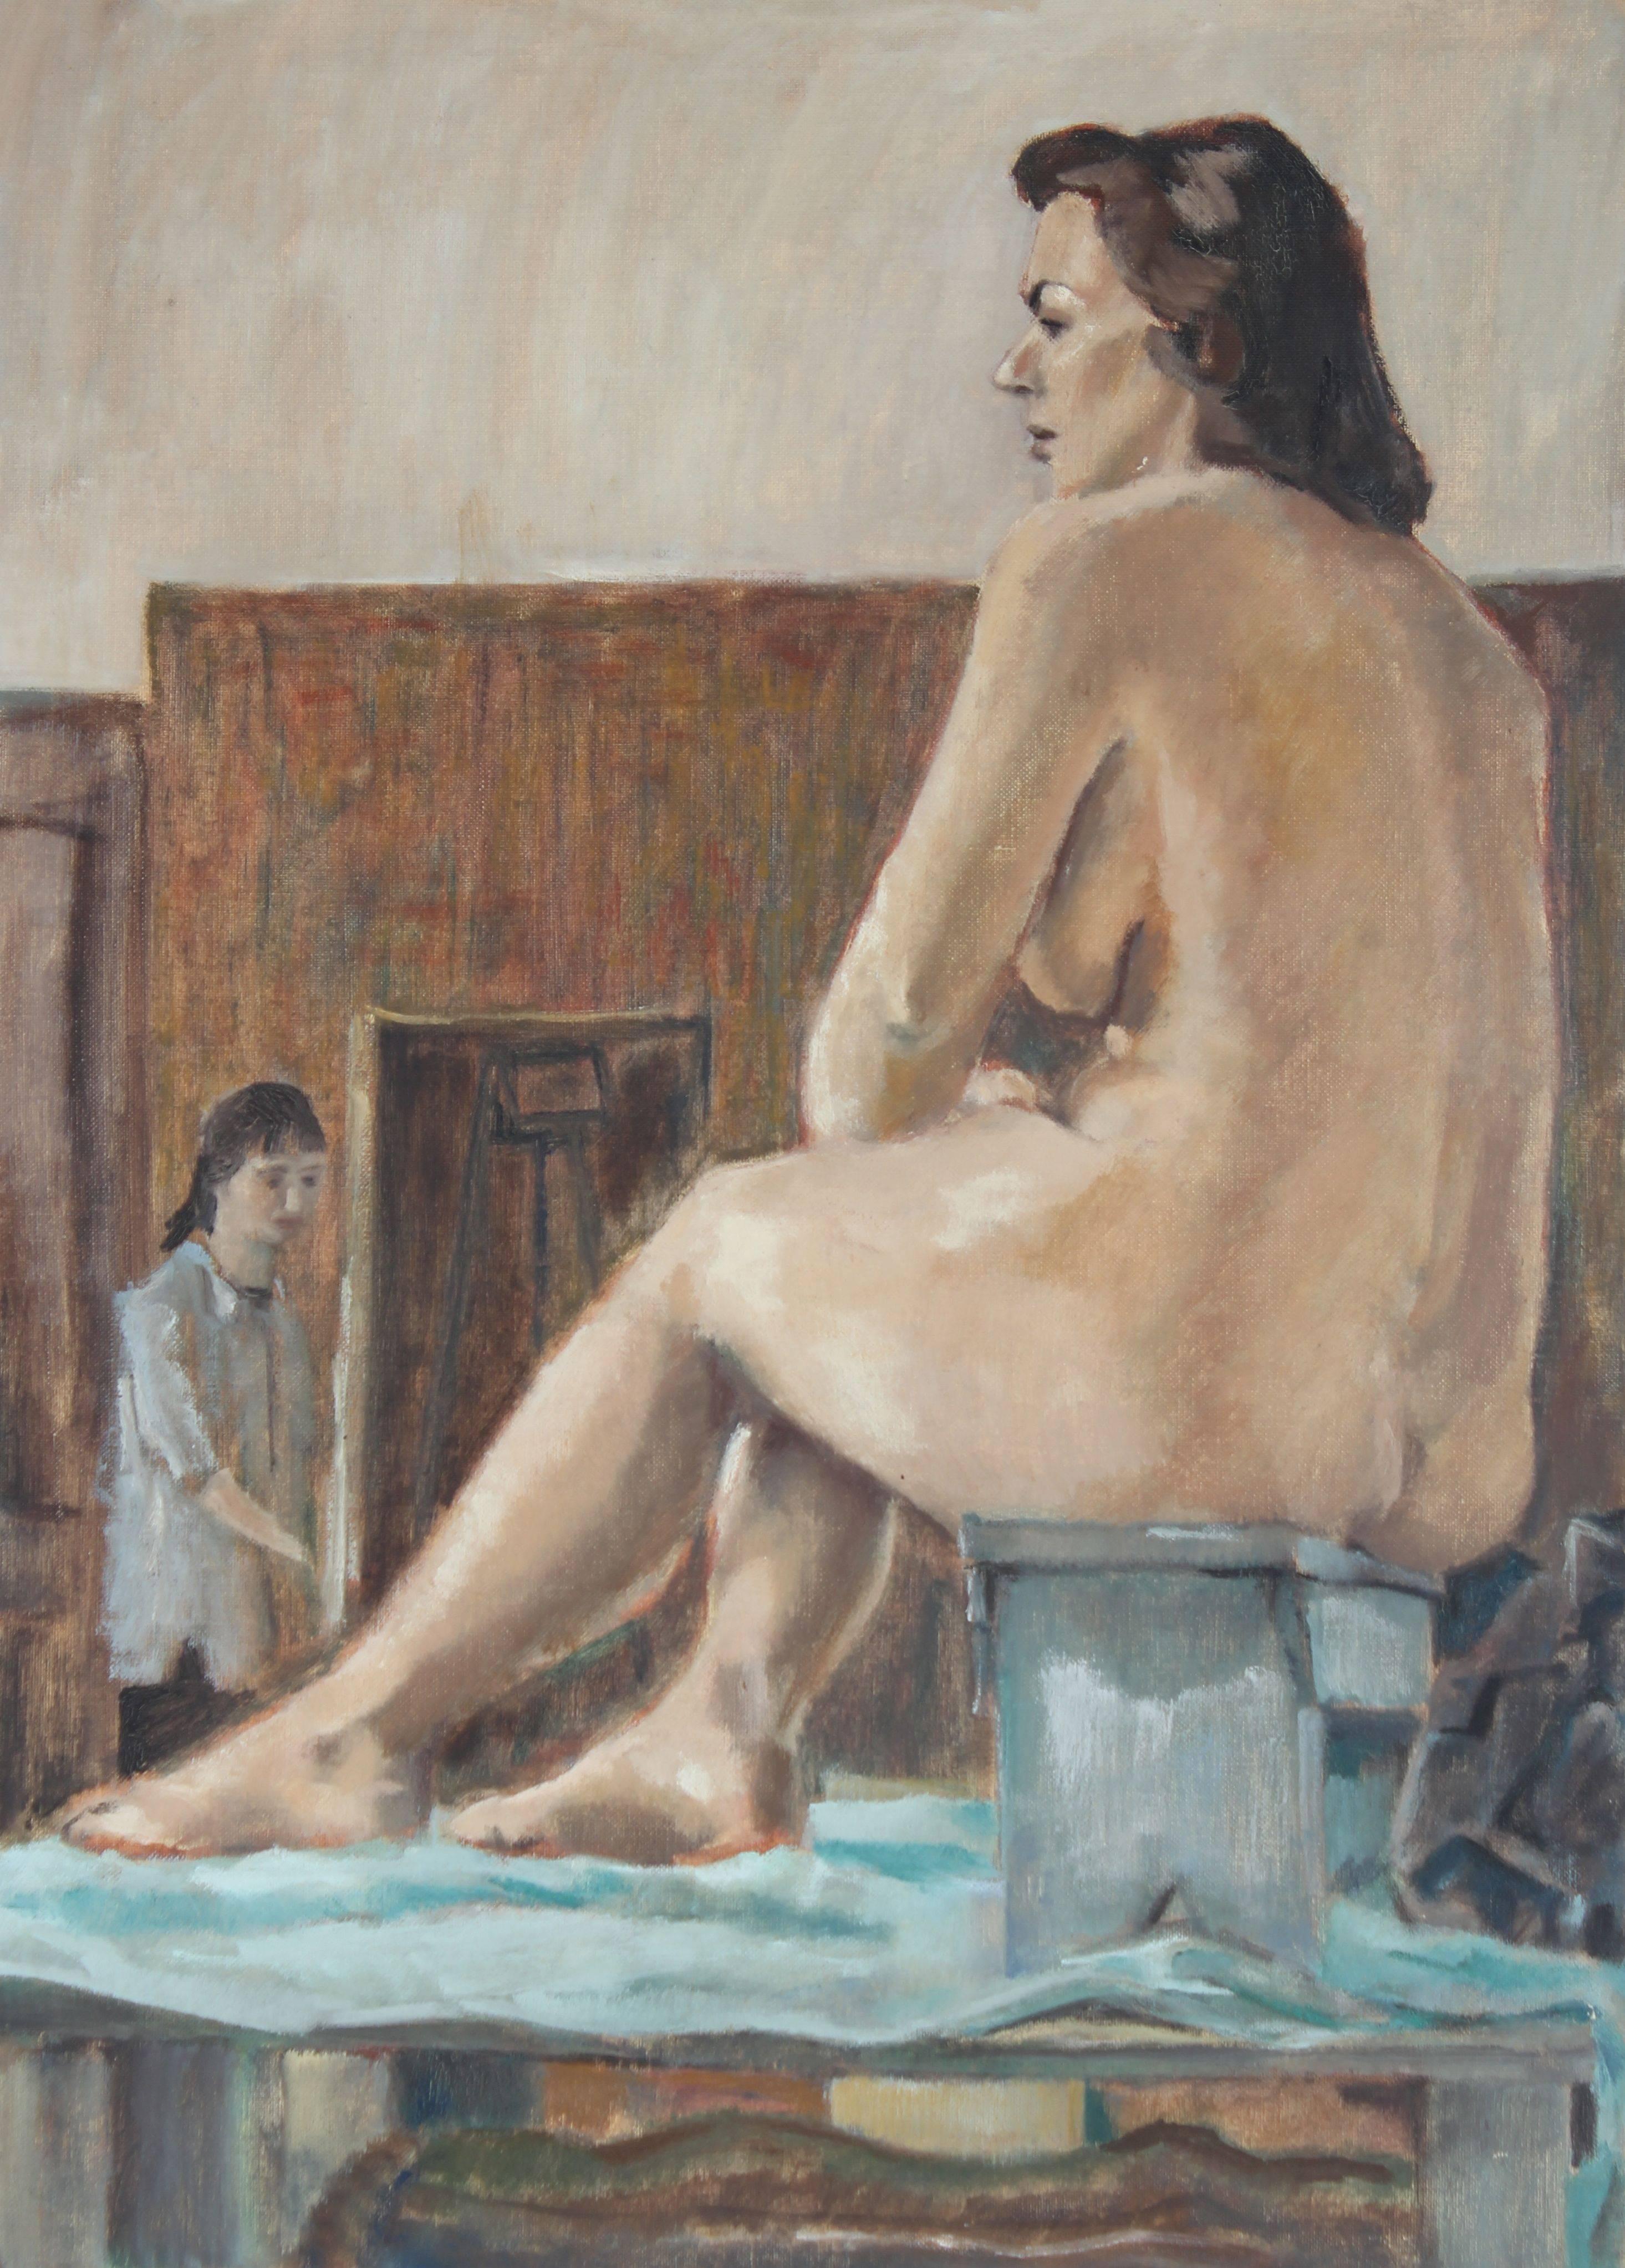 Rip Matteson Interior Painting - Nude Female Figure Model in Art Studio, Oil on Canvas Painting, 1957